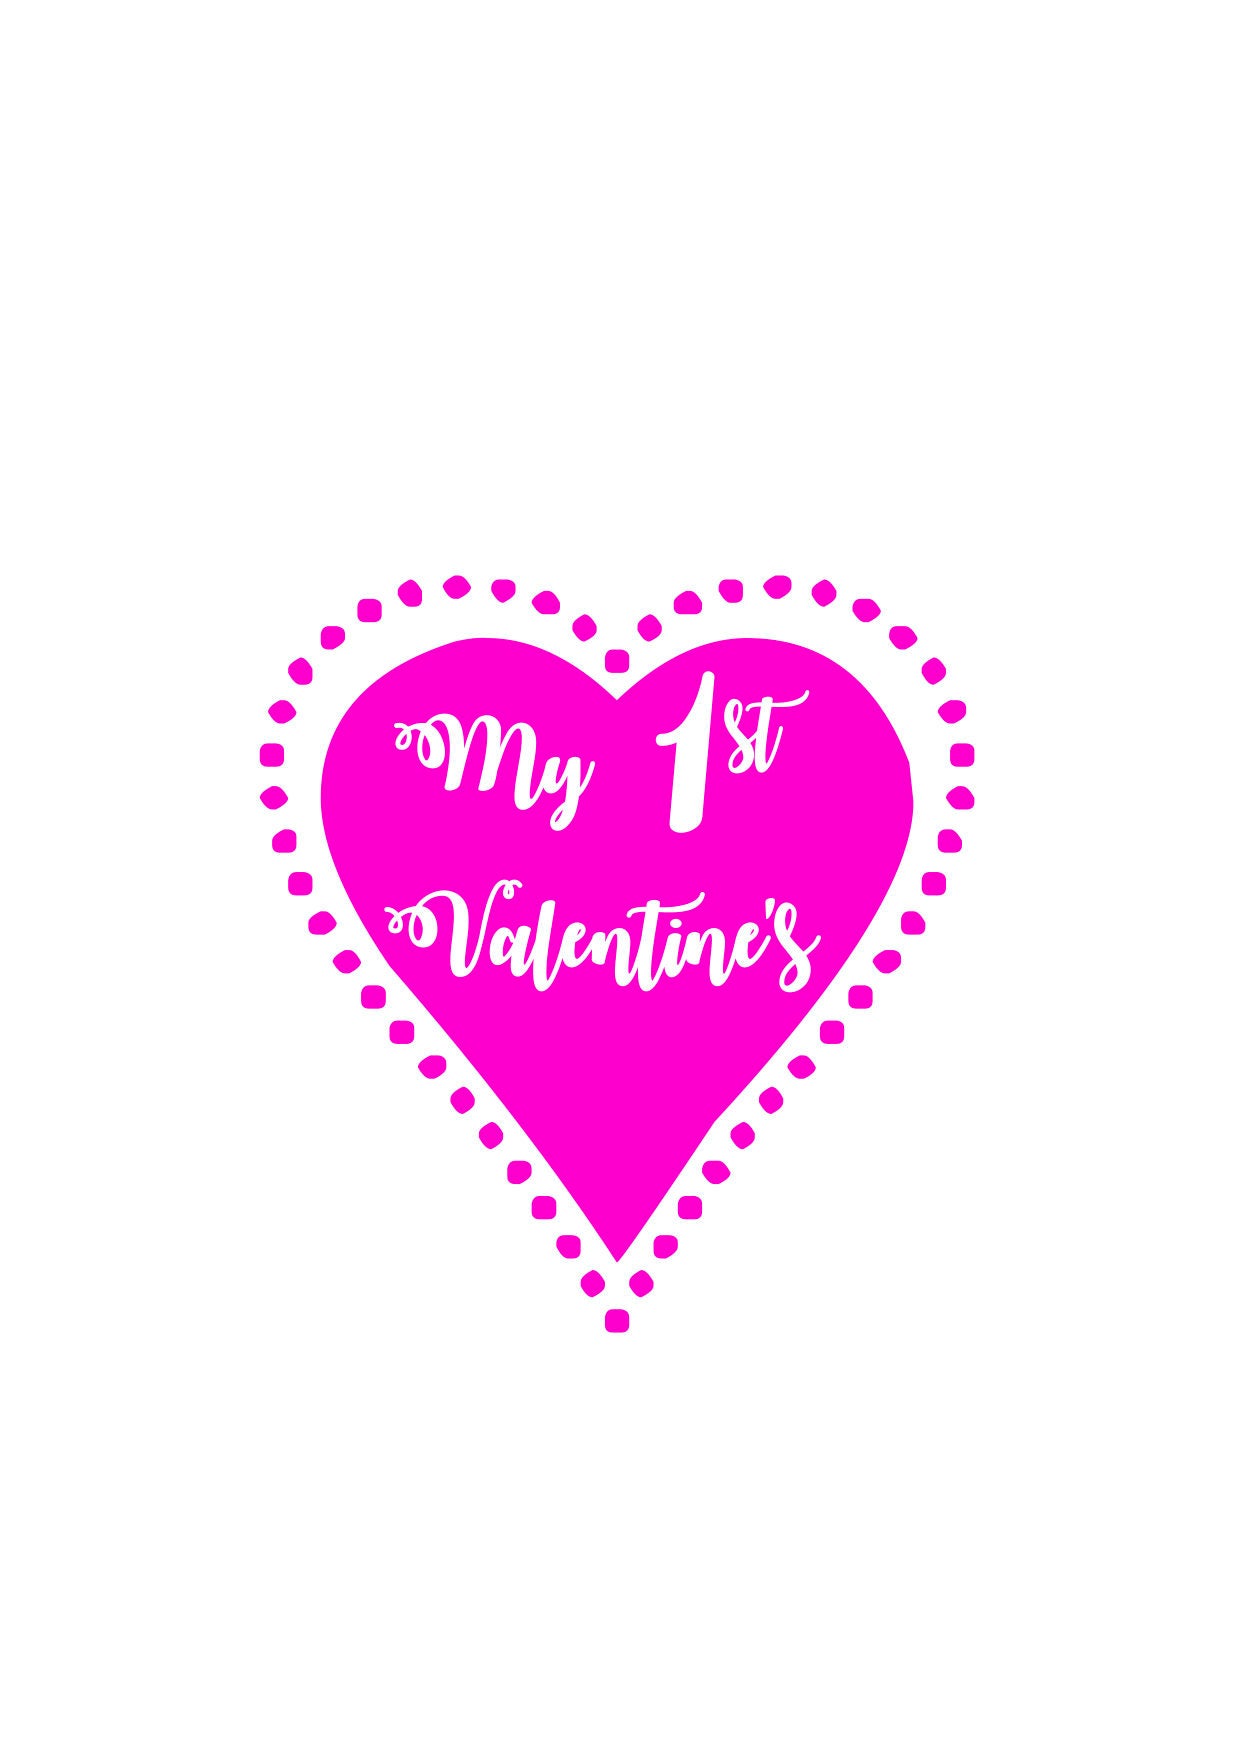 Download My First Valentine's Heart svg,dxf,eps,png,jpg,and pdf ...